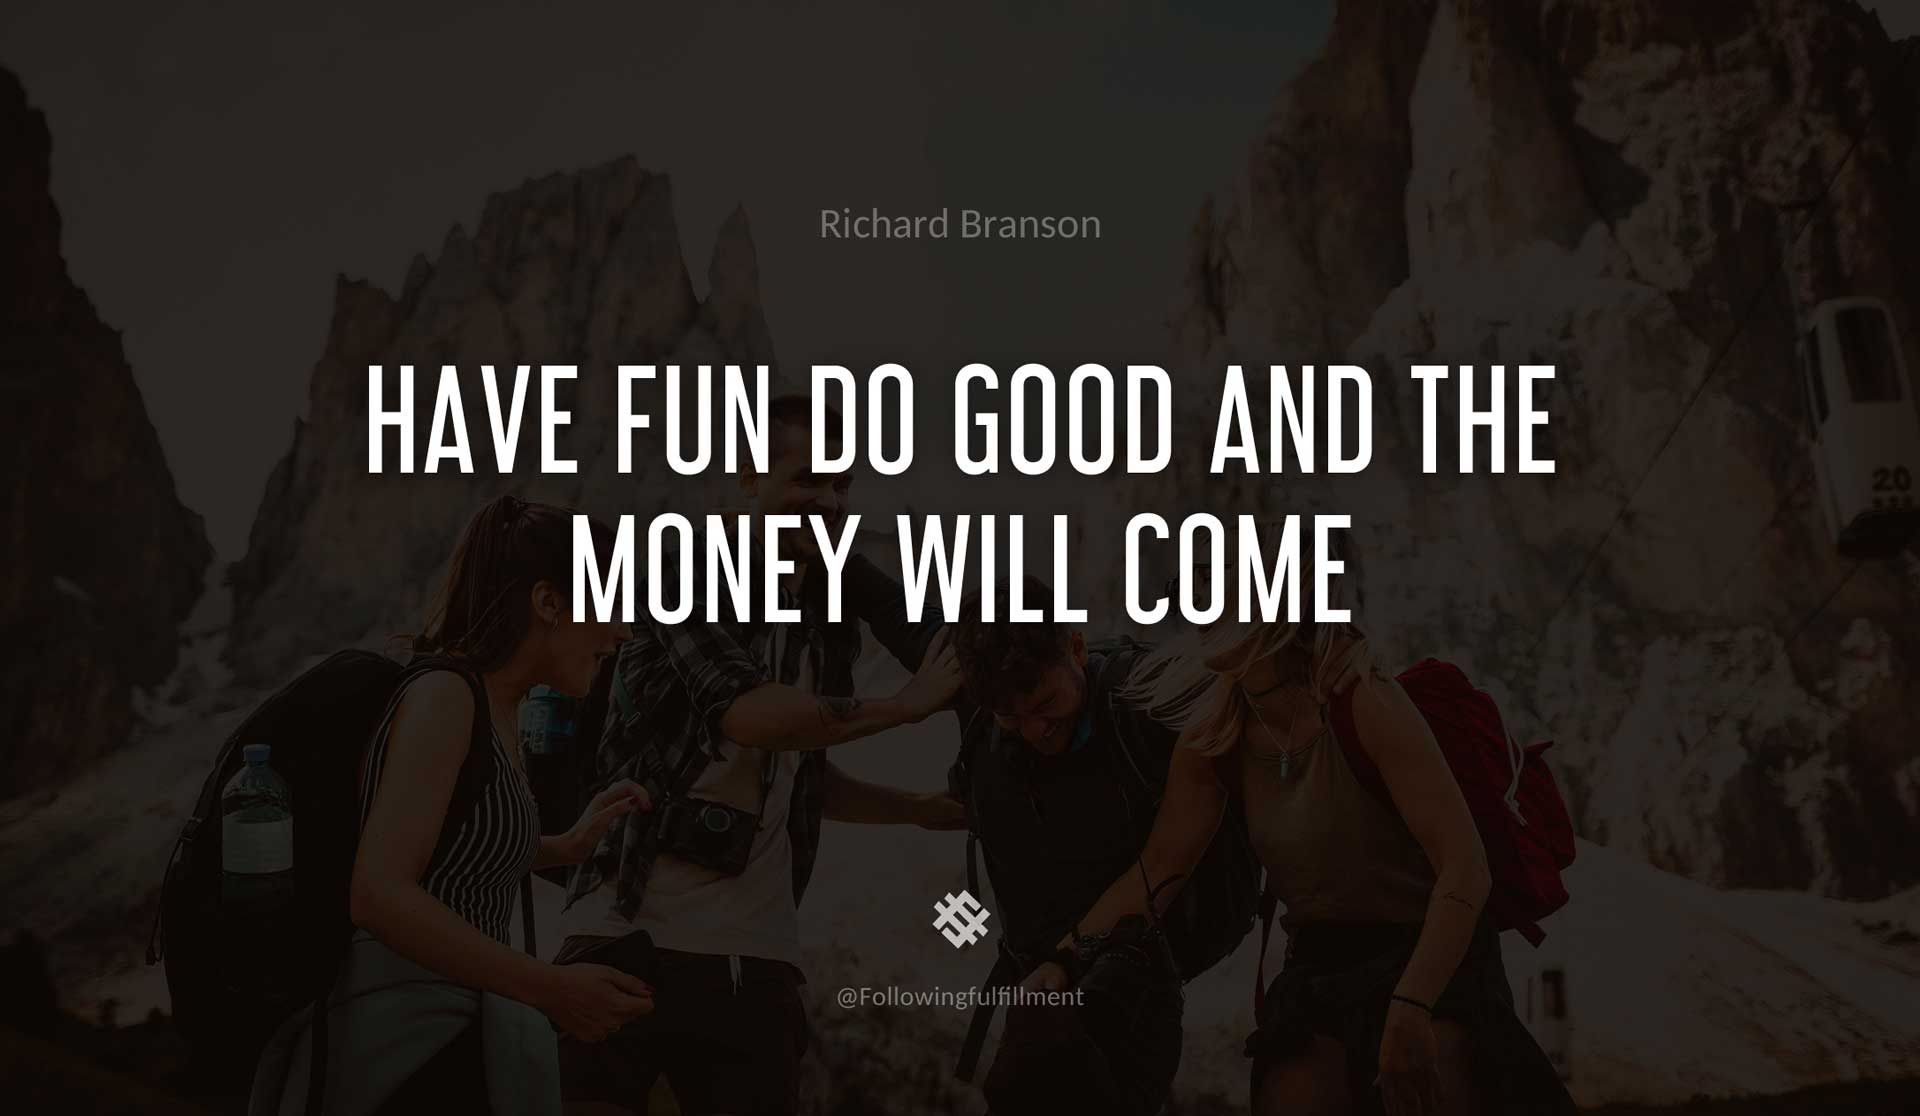 Have-fun-do-good-and-the-money-will-come-RICHARD-BRANSON-Quote.jpg